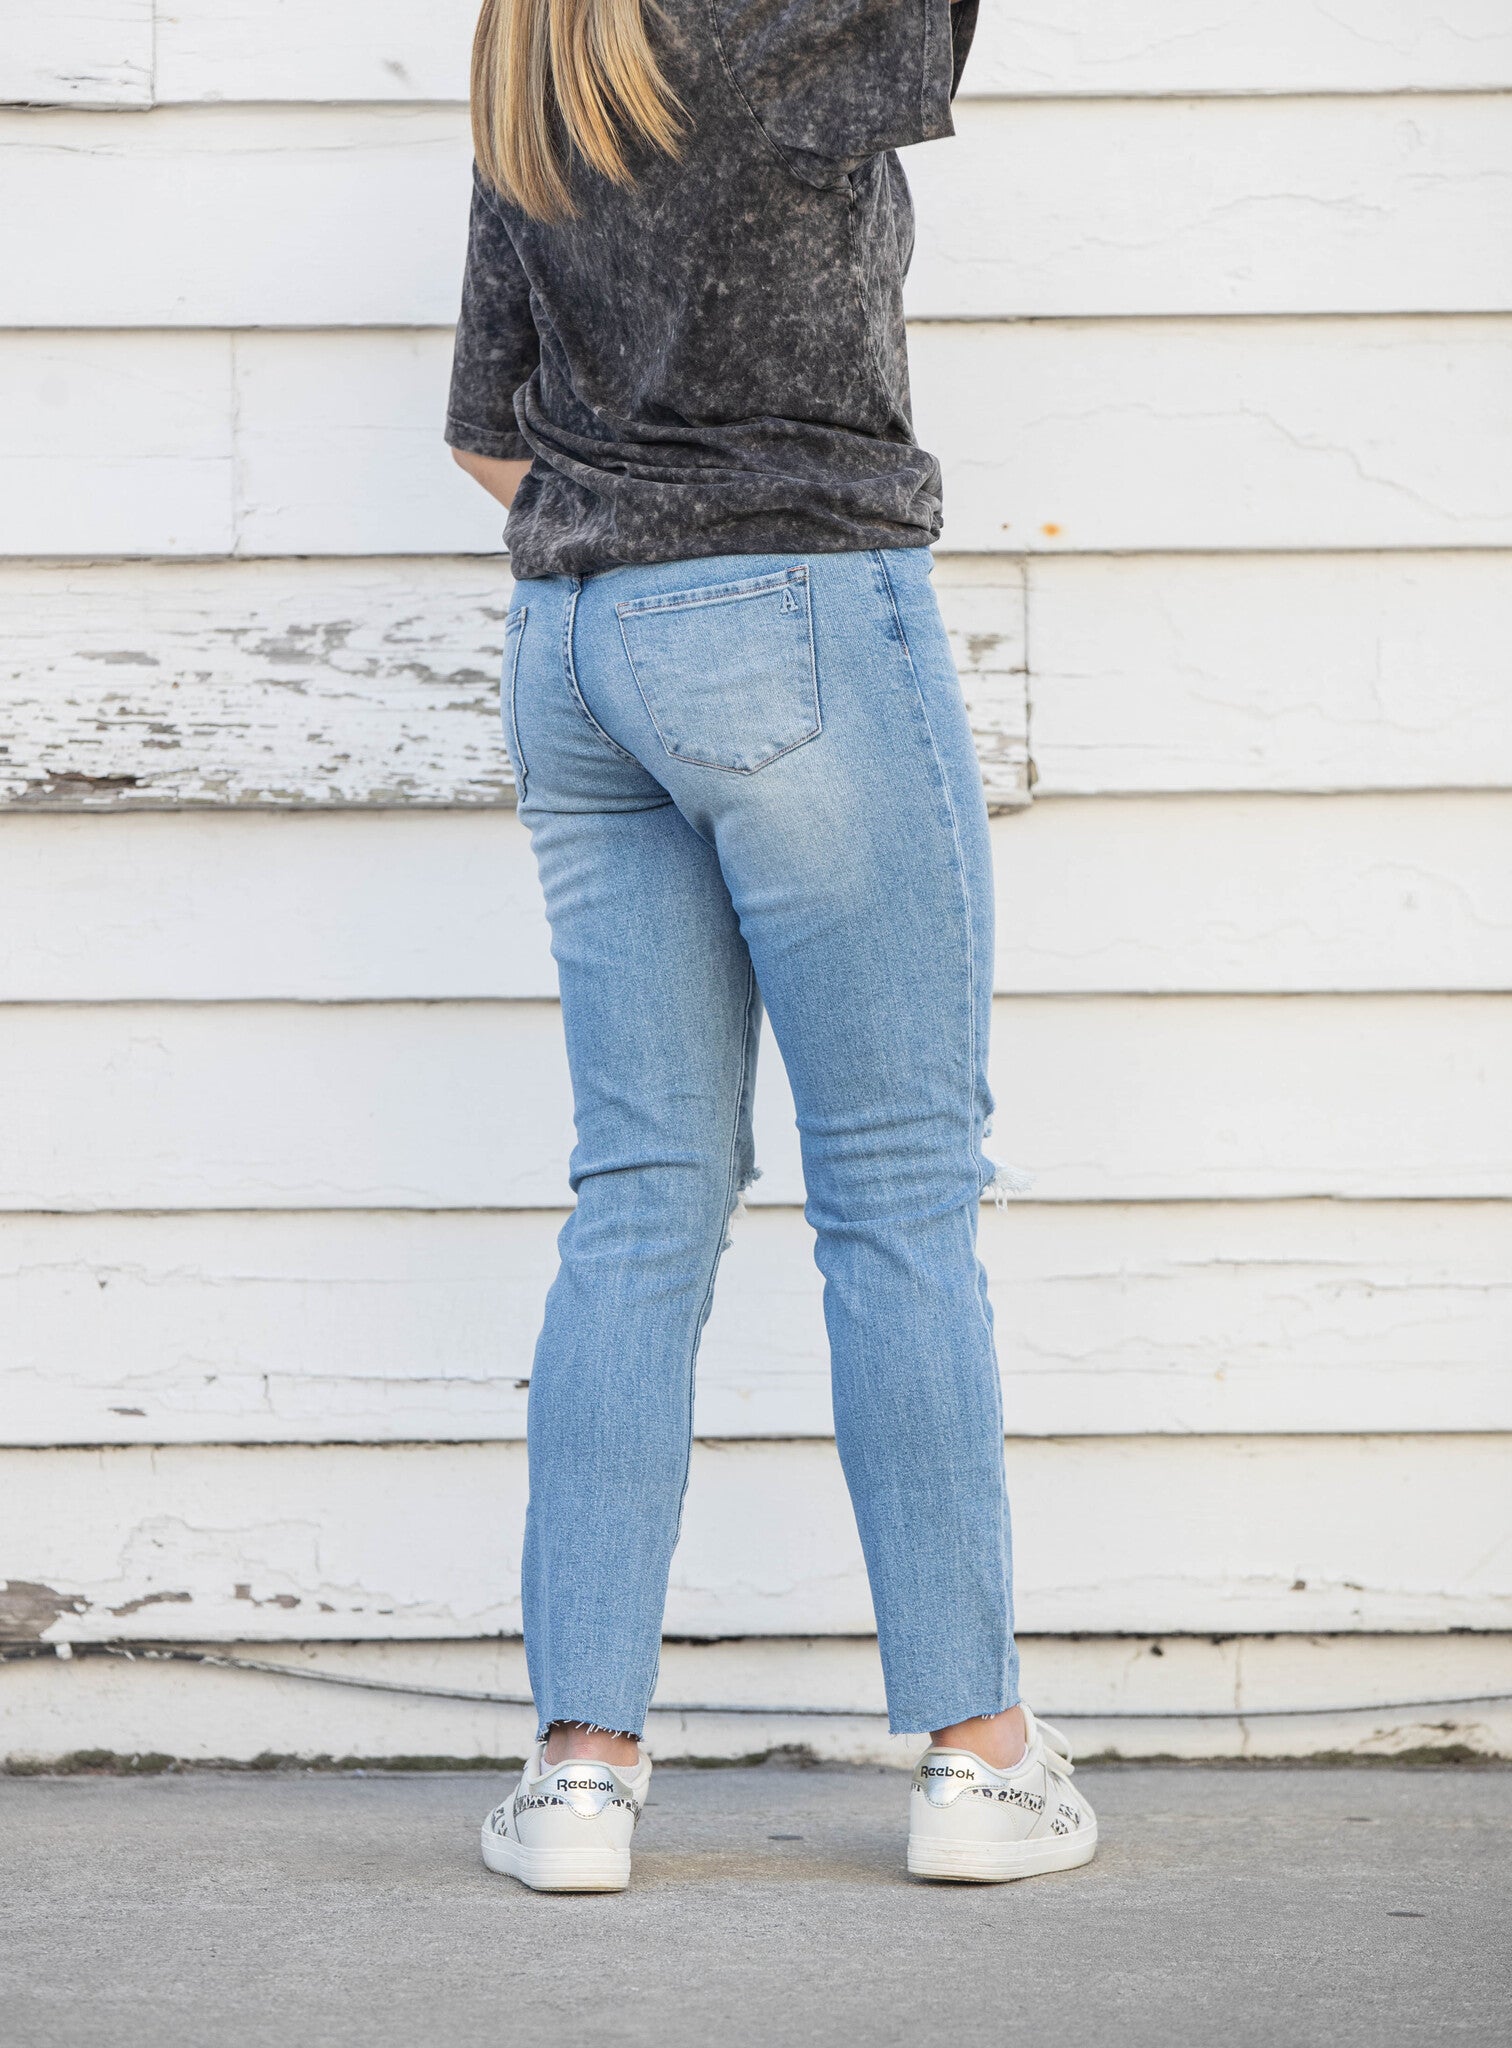 Renee Orchidlands Distressed Jeans